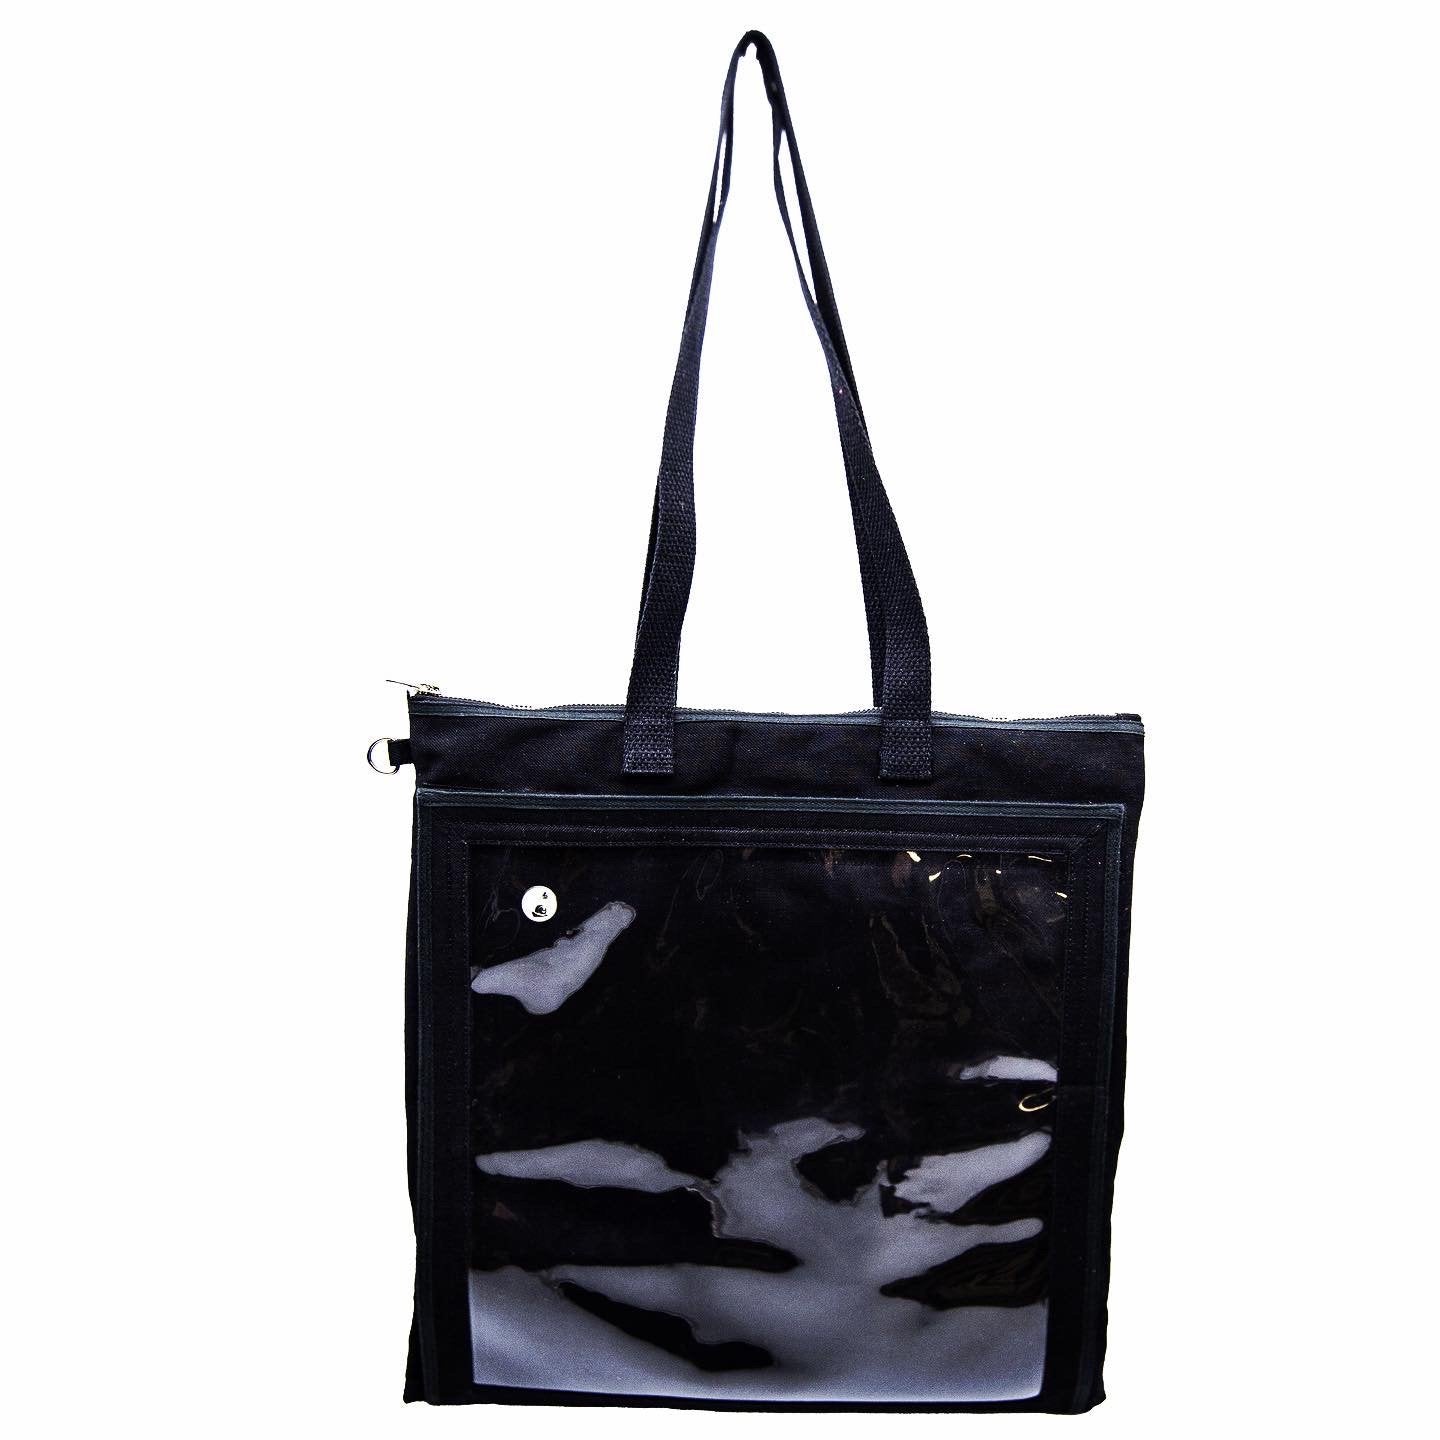 A black canvas Ita tote showing only one enamel pin inside. The tote is big enough to hold vinyl records, a jacket, or a change of clothes.